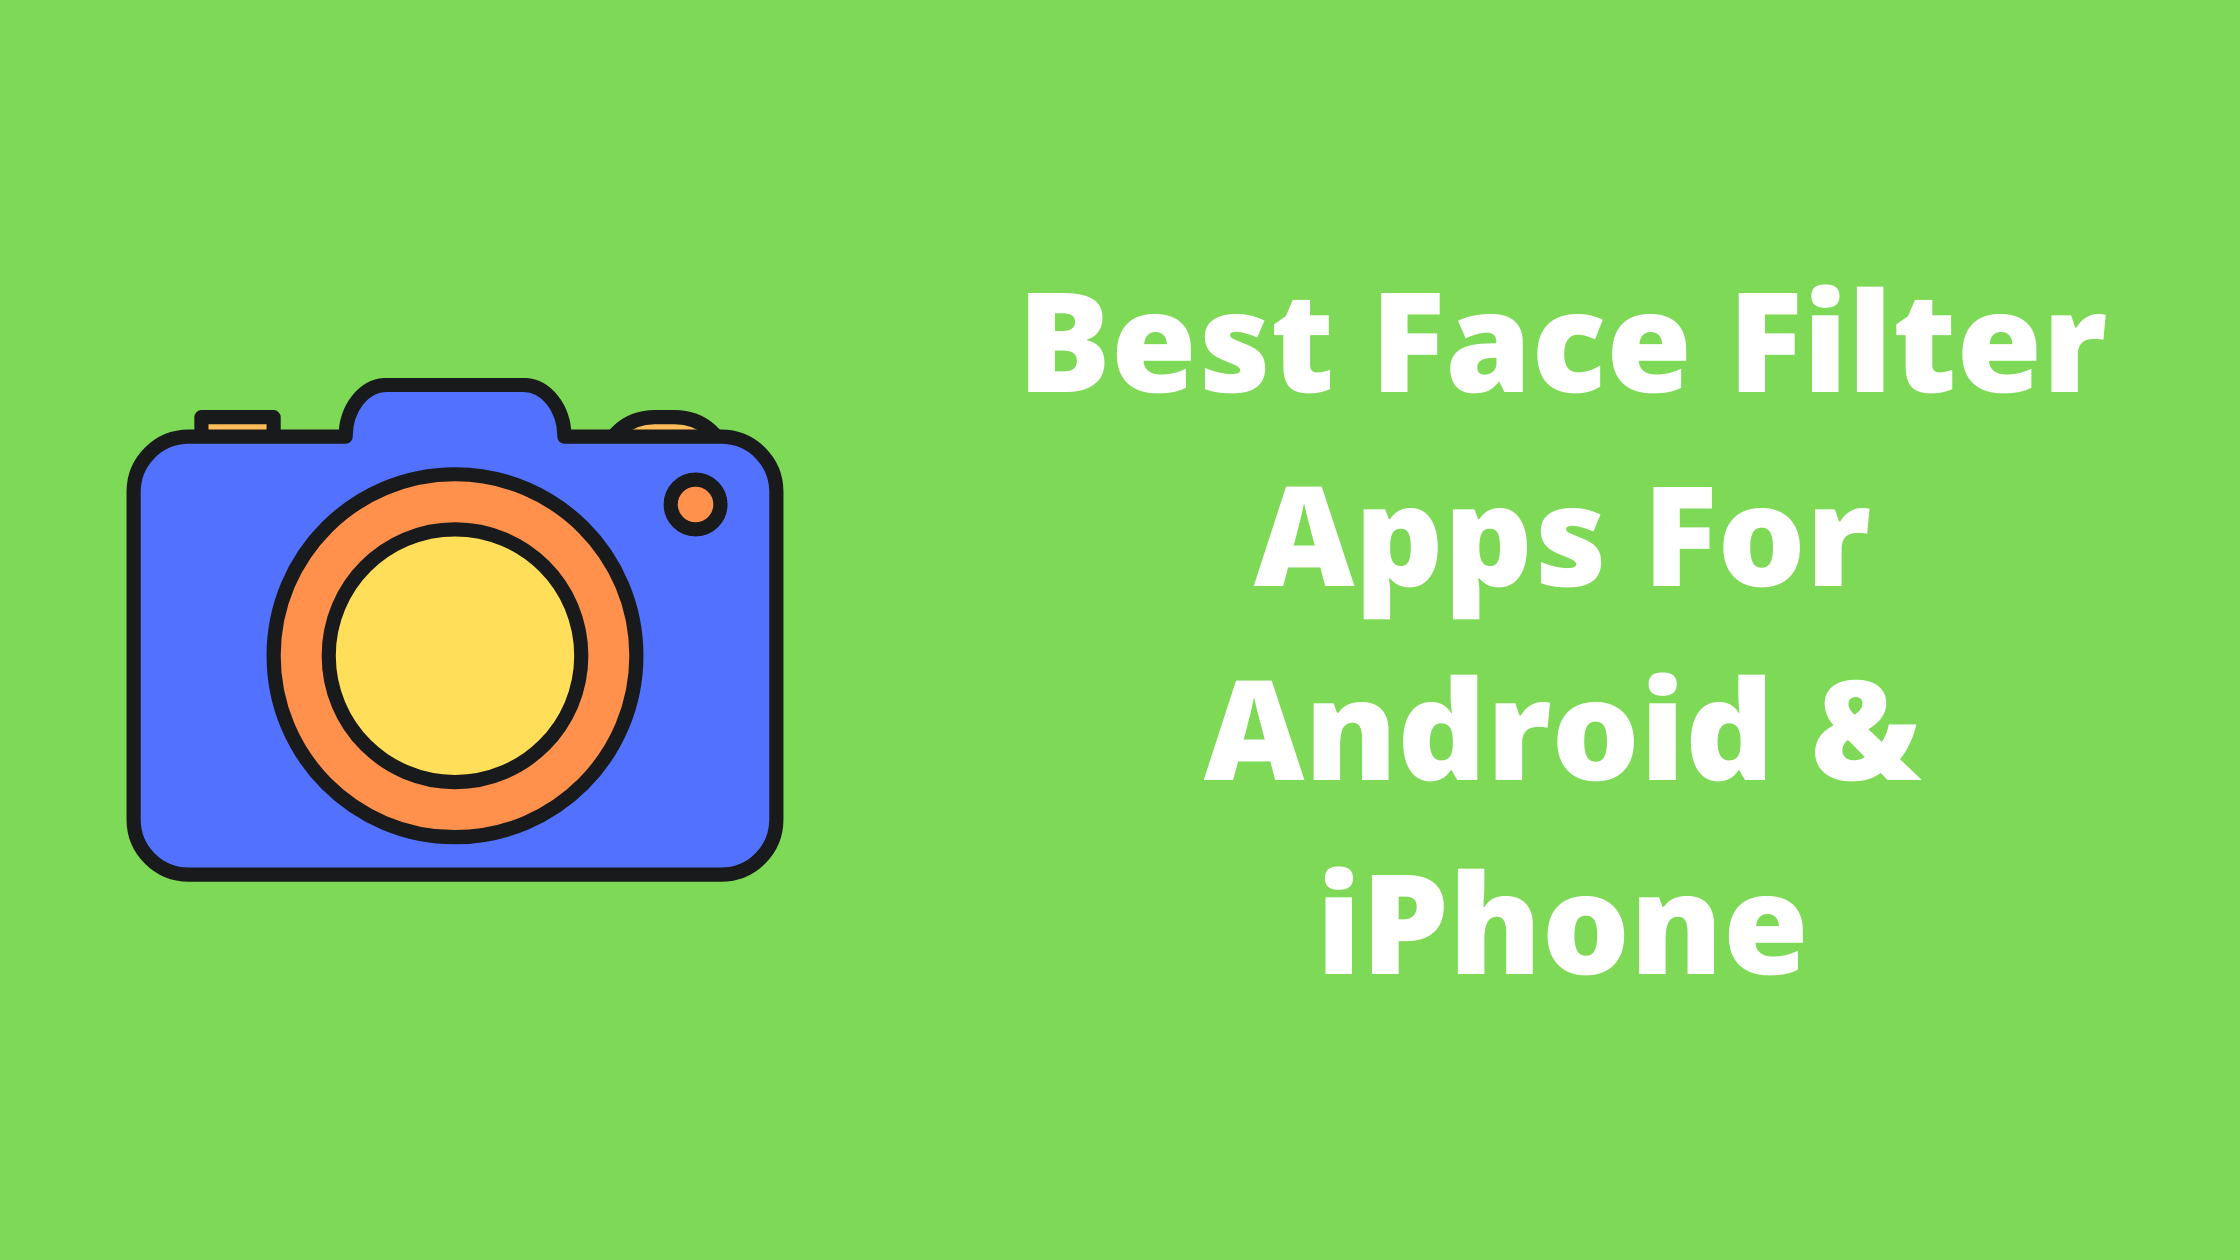 Best Face Filter Apps For Android & iPhone